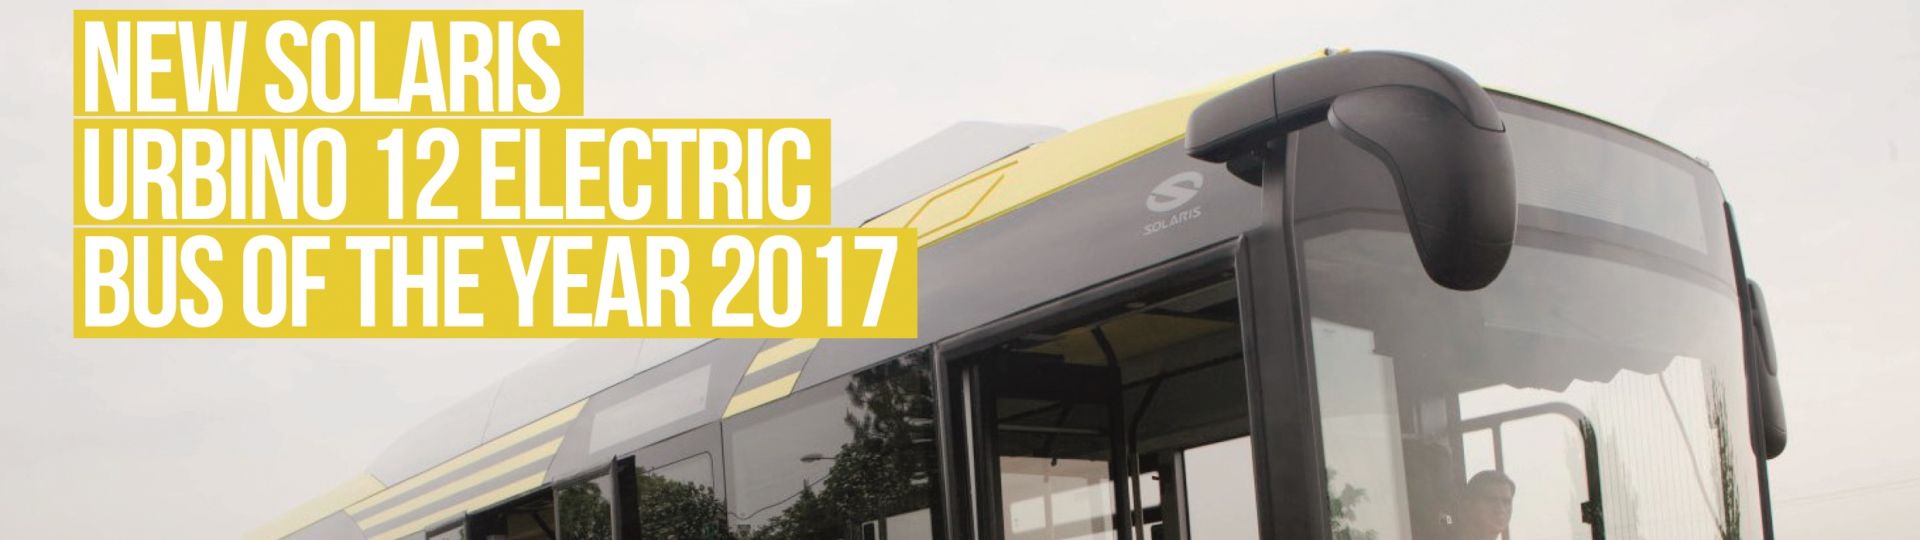 The electric Solaris Urbino crowned Bus of the Year 2017!